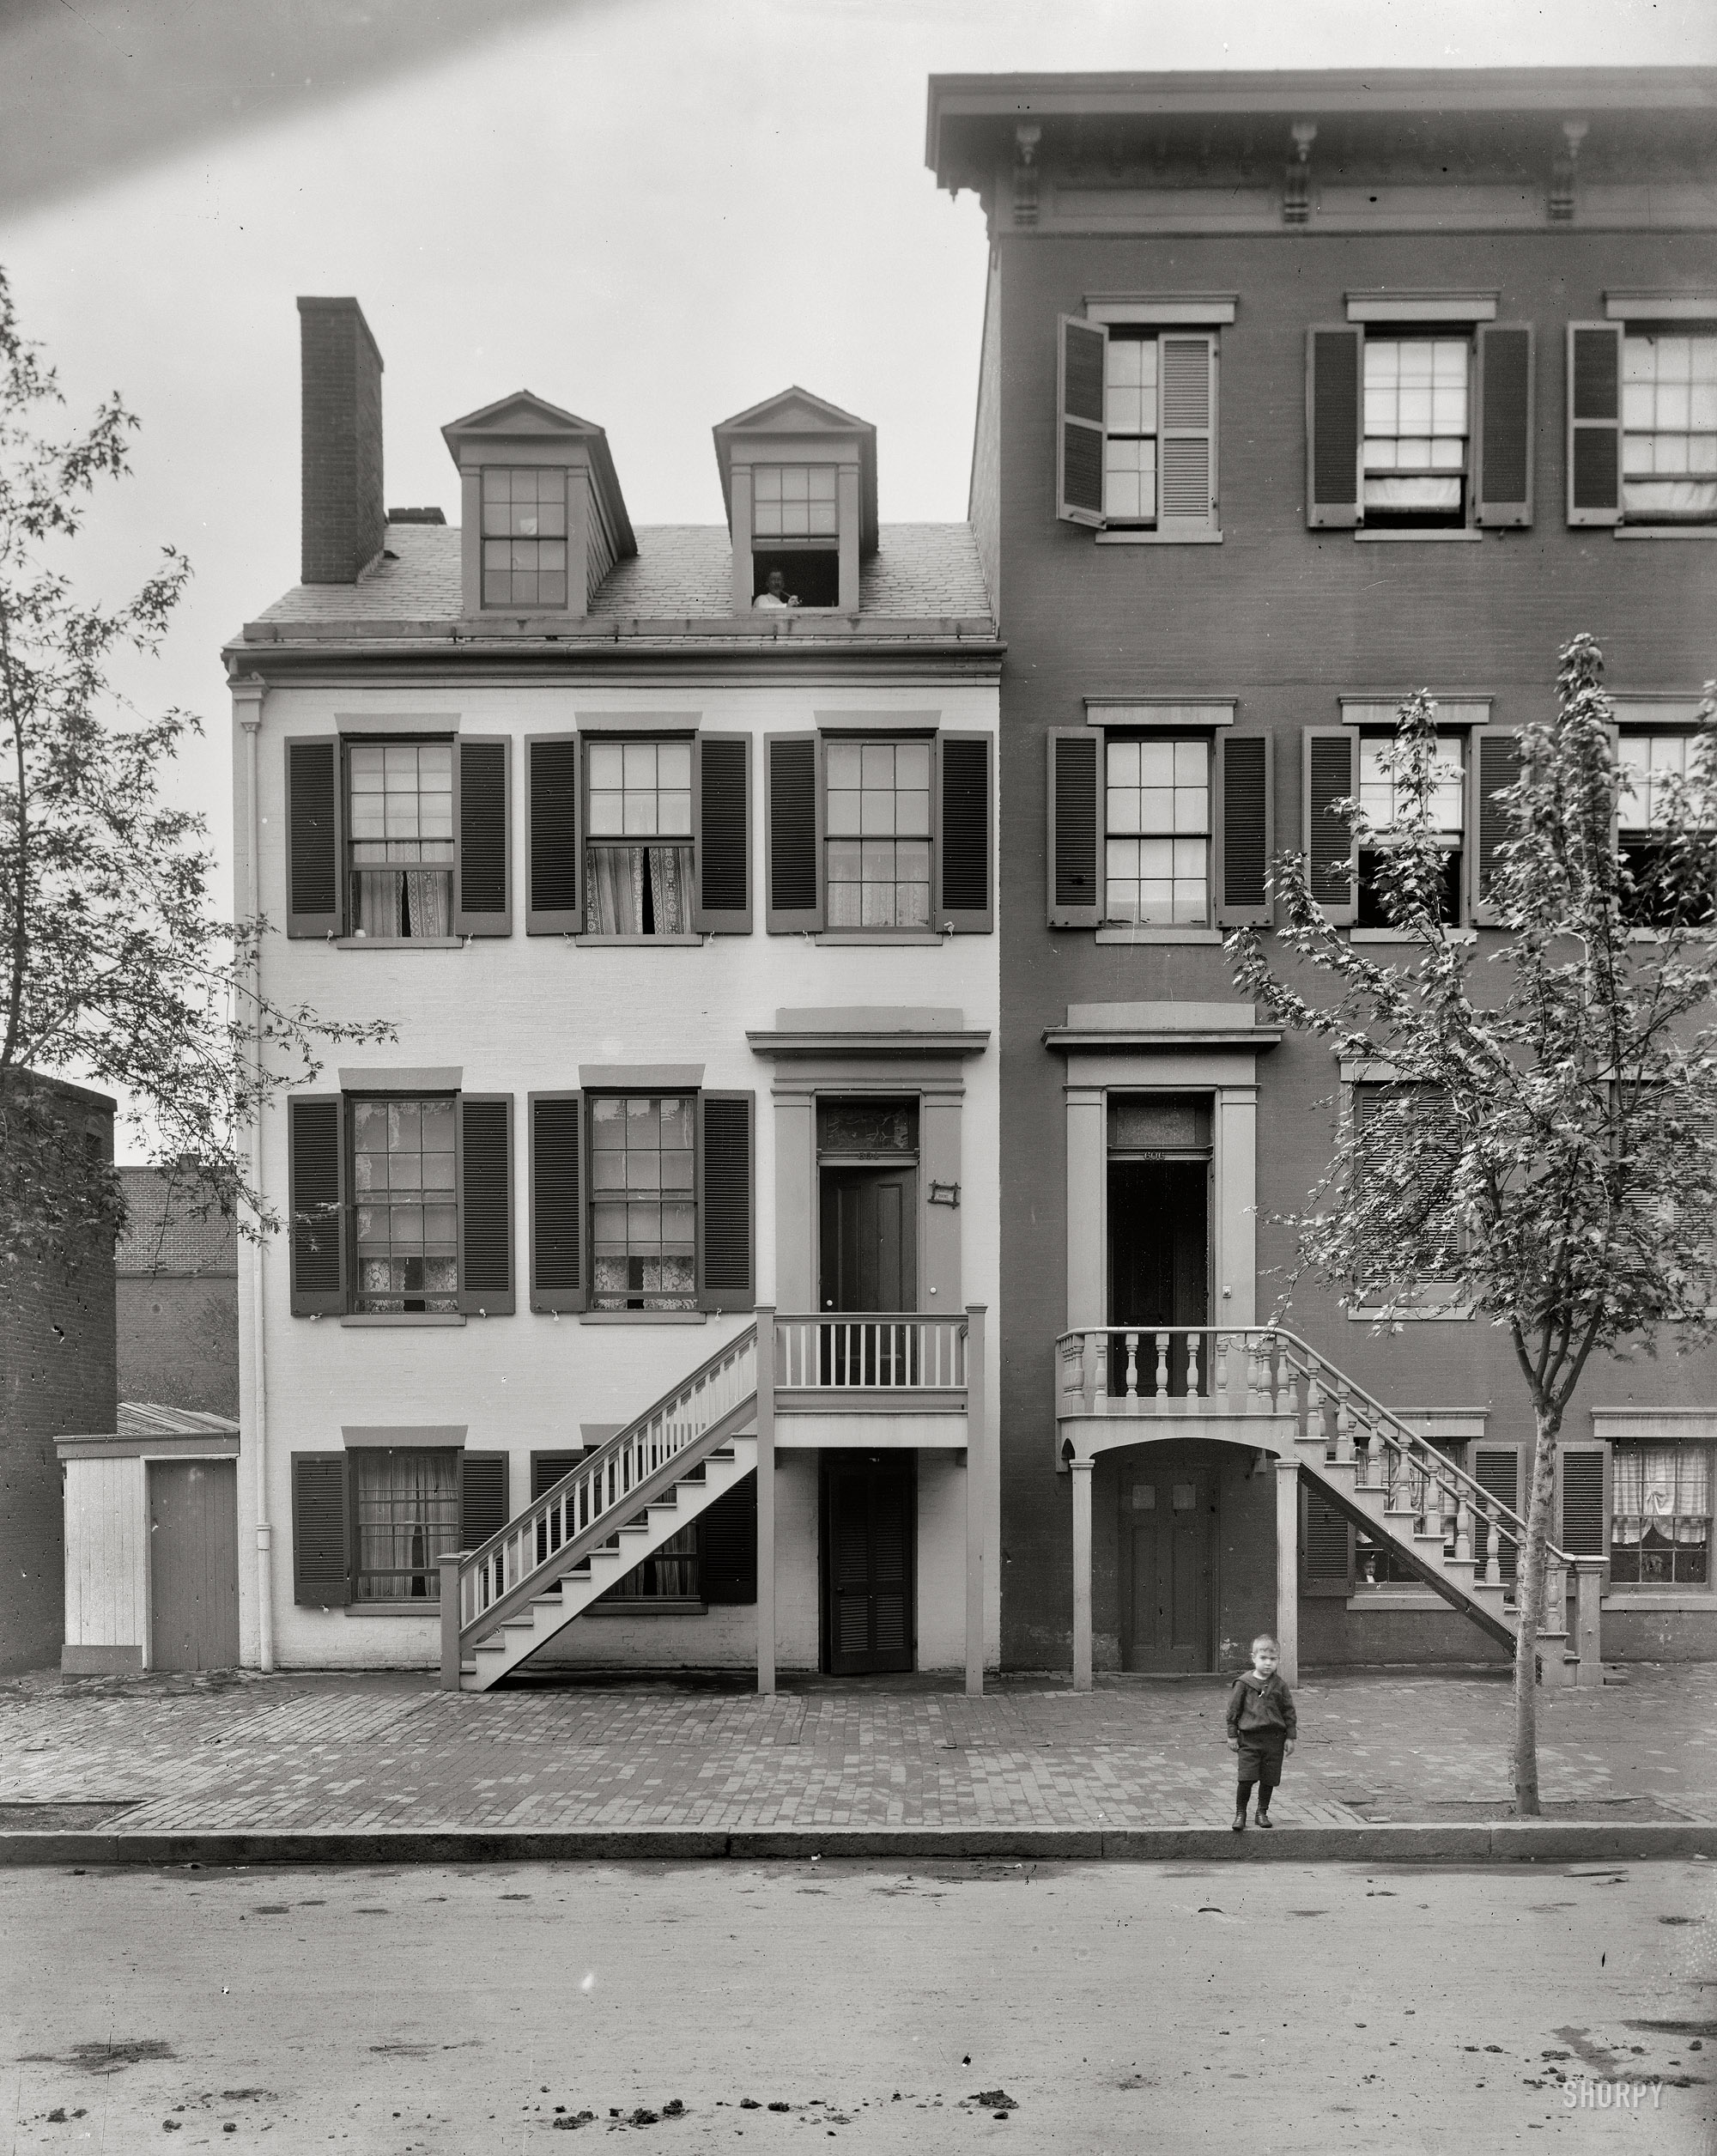 Circa 1900. "Mrs. Mary Surratt house at 604 H Street N.W., Washington." Boardinghouse owned by Mary Surratt where the Lincoln conspirators are said to have plotted the abduction of the President in 1865. Brady-Handy Photograph Collection glass negative, Library of Congress. View full size.